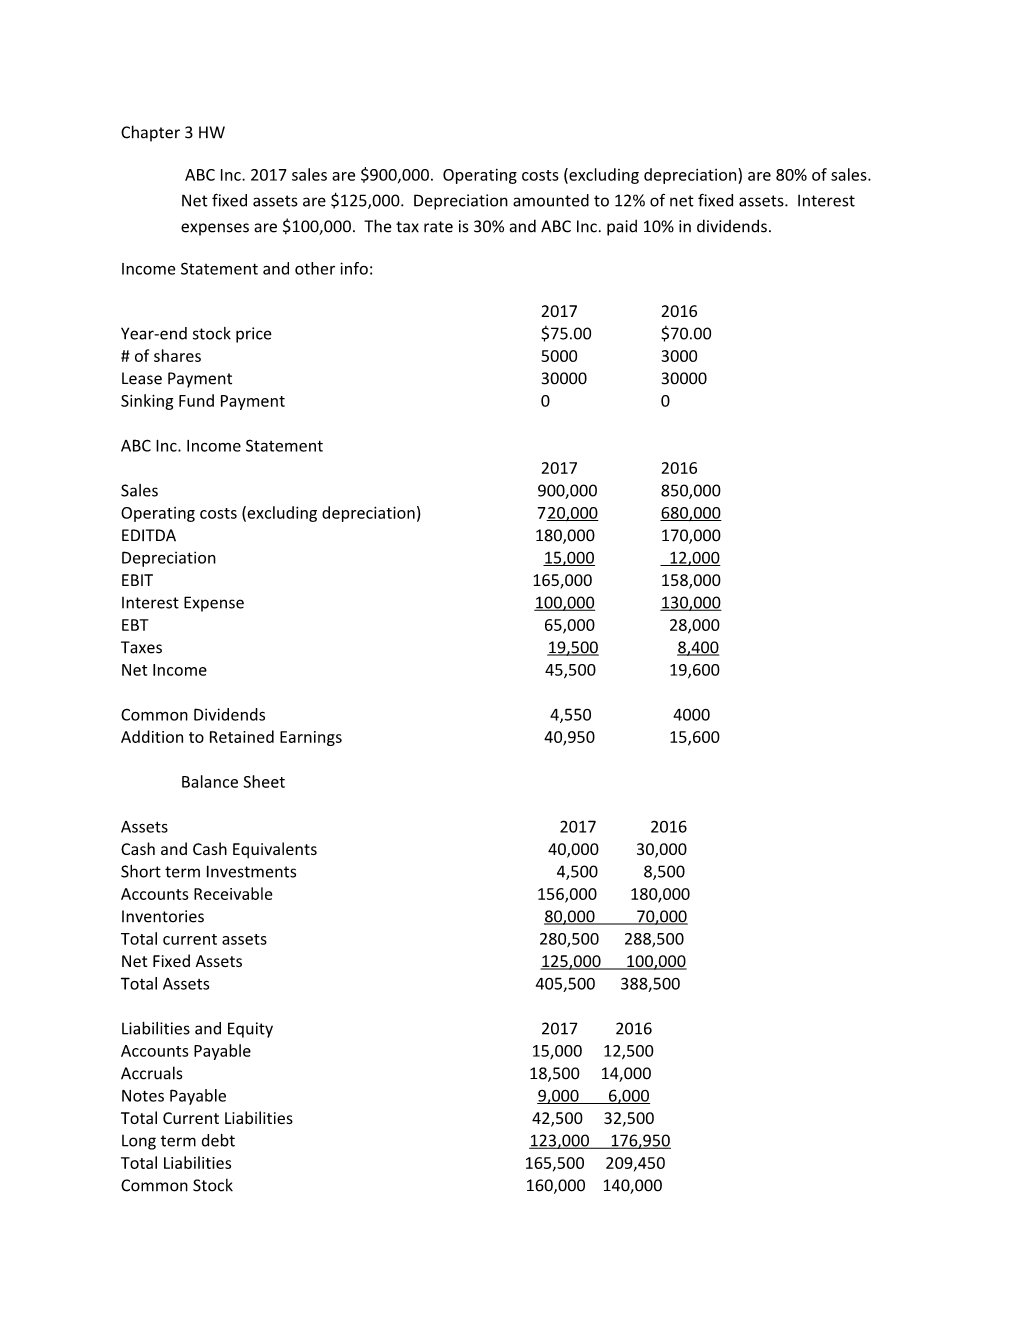 Income Statement and Other Info